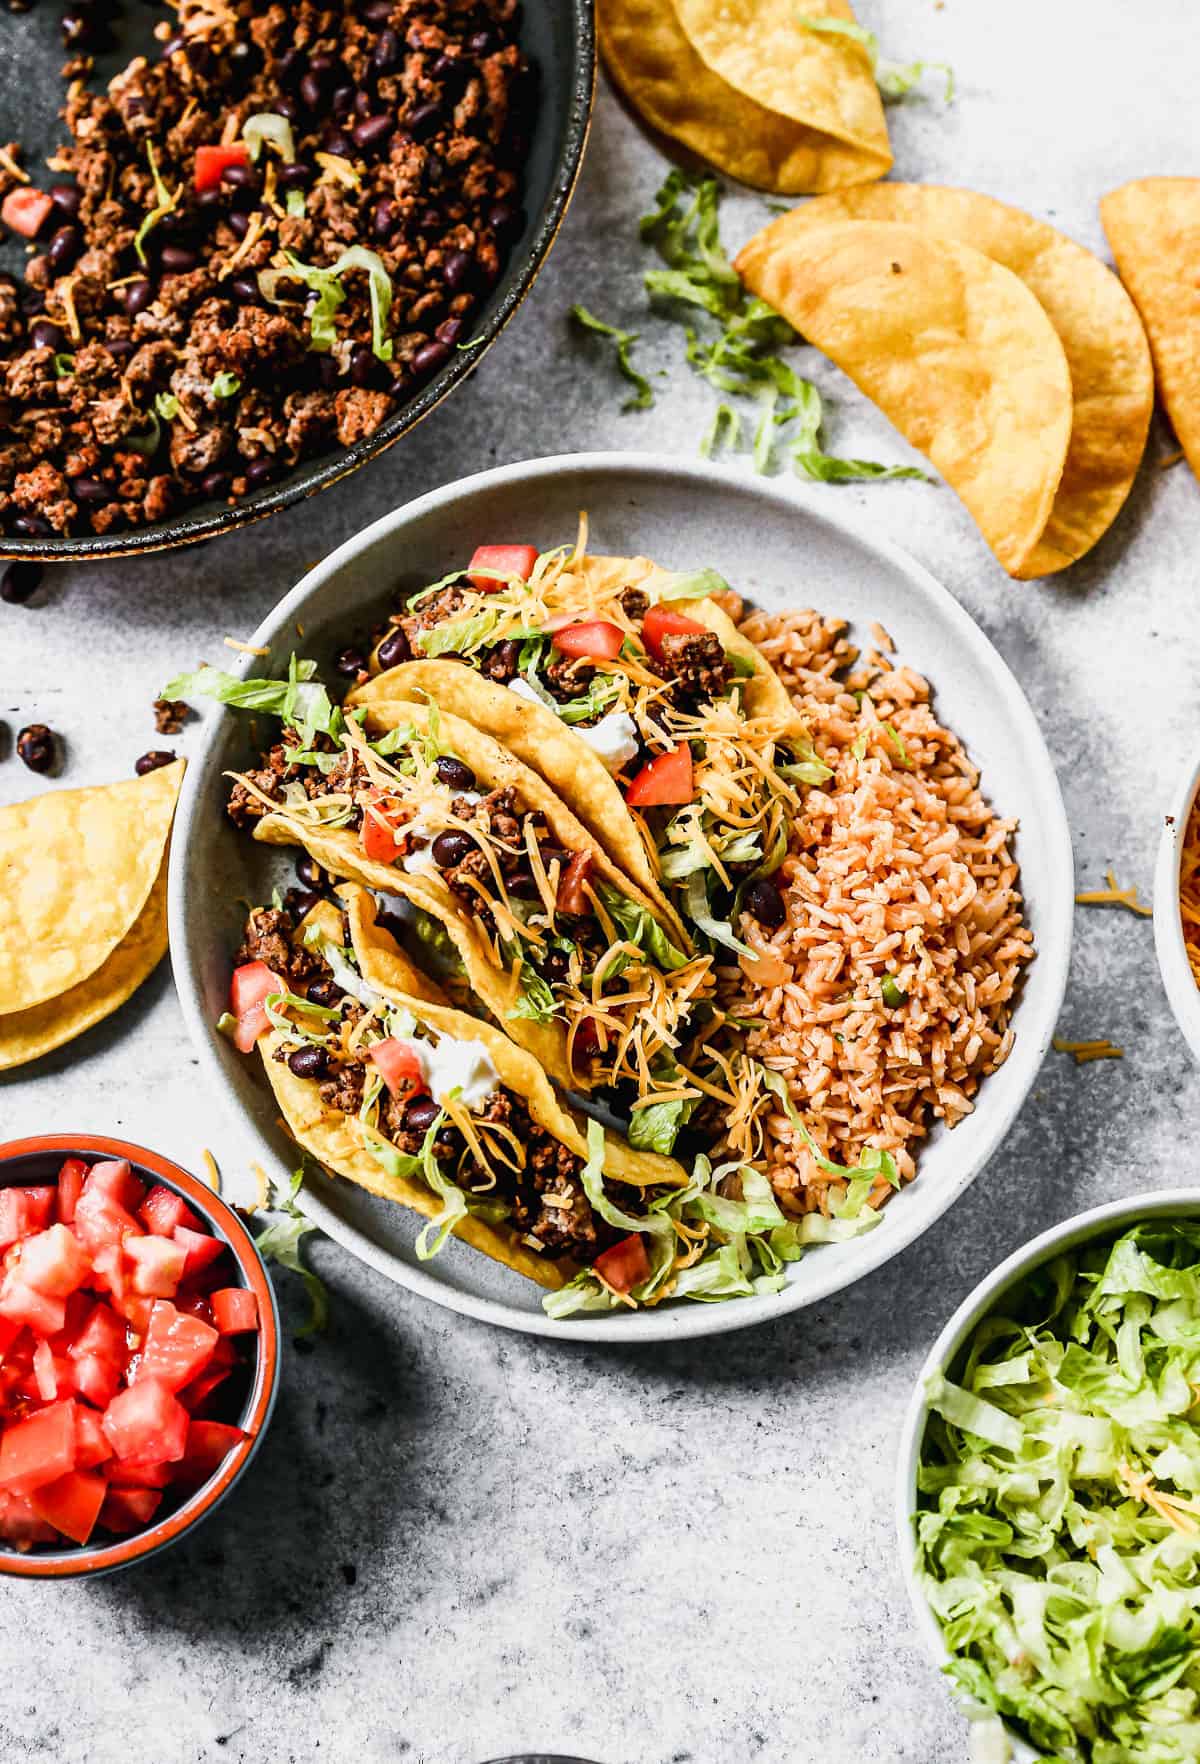 Three ground beef tacos with crispy shells and toppings on a plate with Mexican rice.